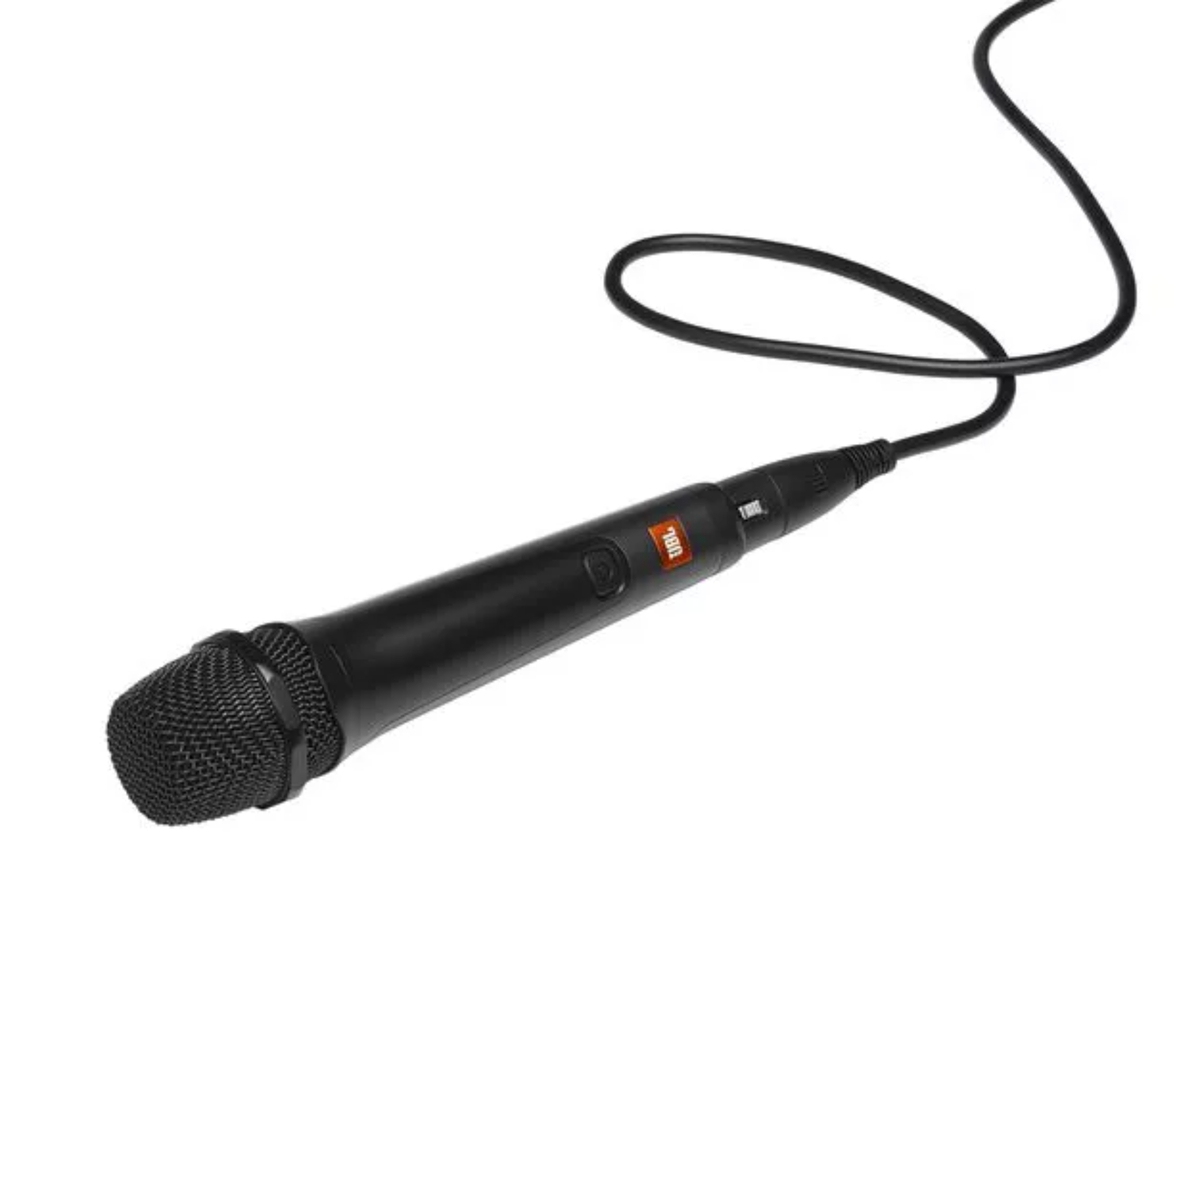 JBL Wired Dynamic Vocal Microphone with Cable, Black, JBLPBM100